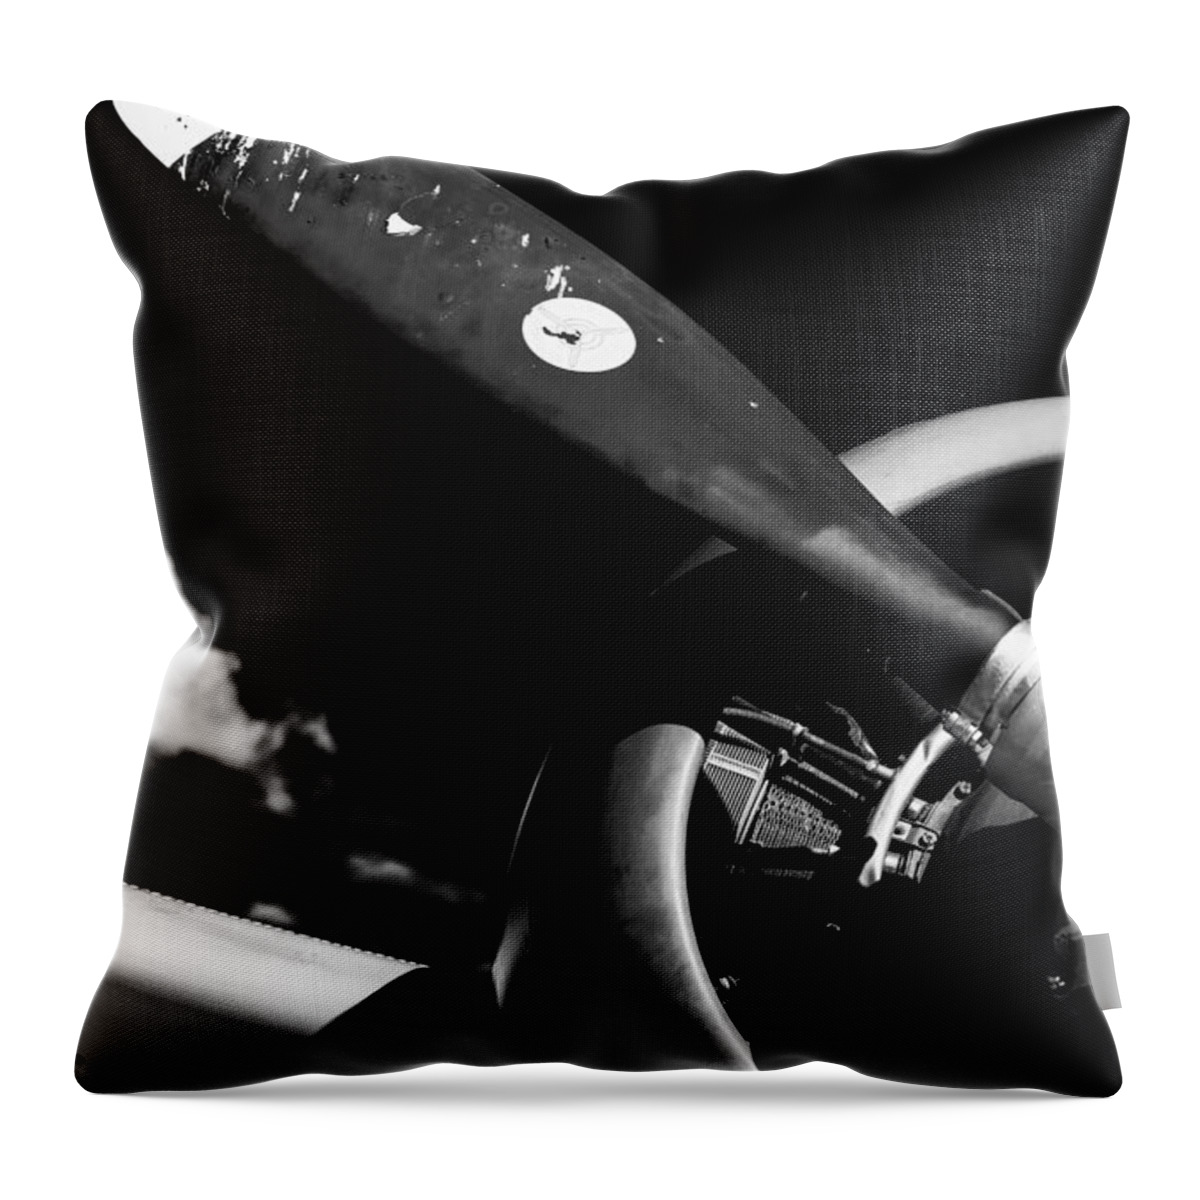 Plane Throw Pillow featuring the photograph Plane Portrait 1 by Ryan Weddle